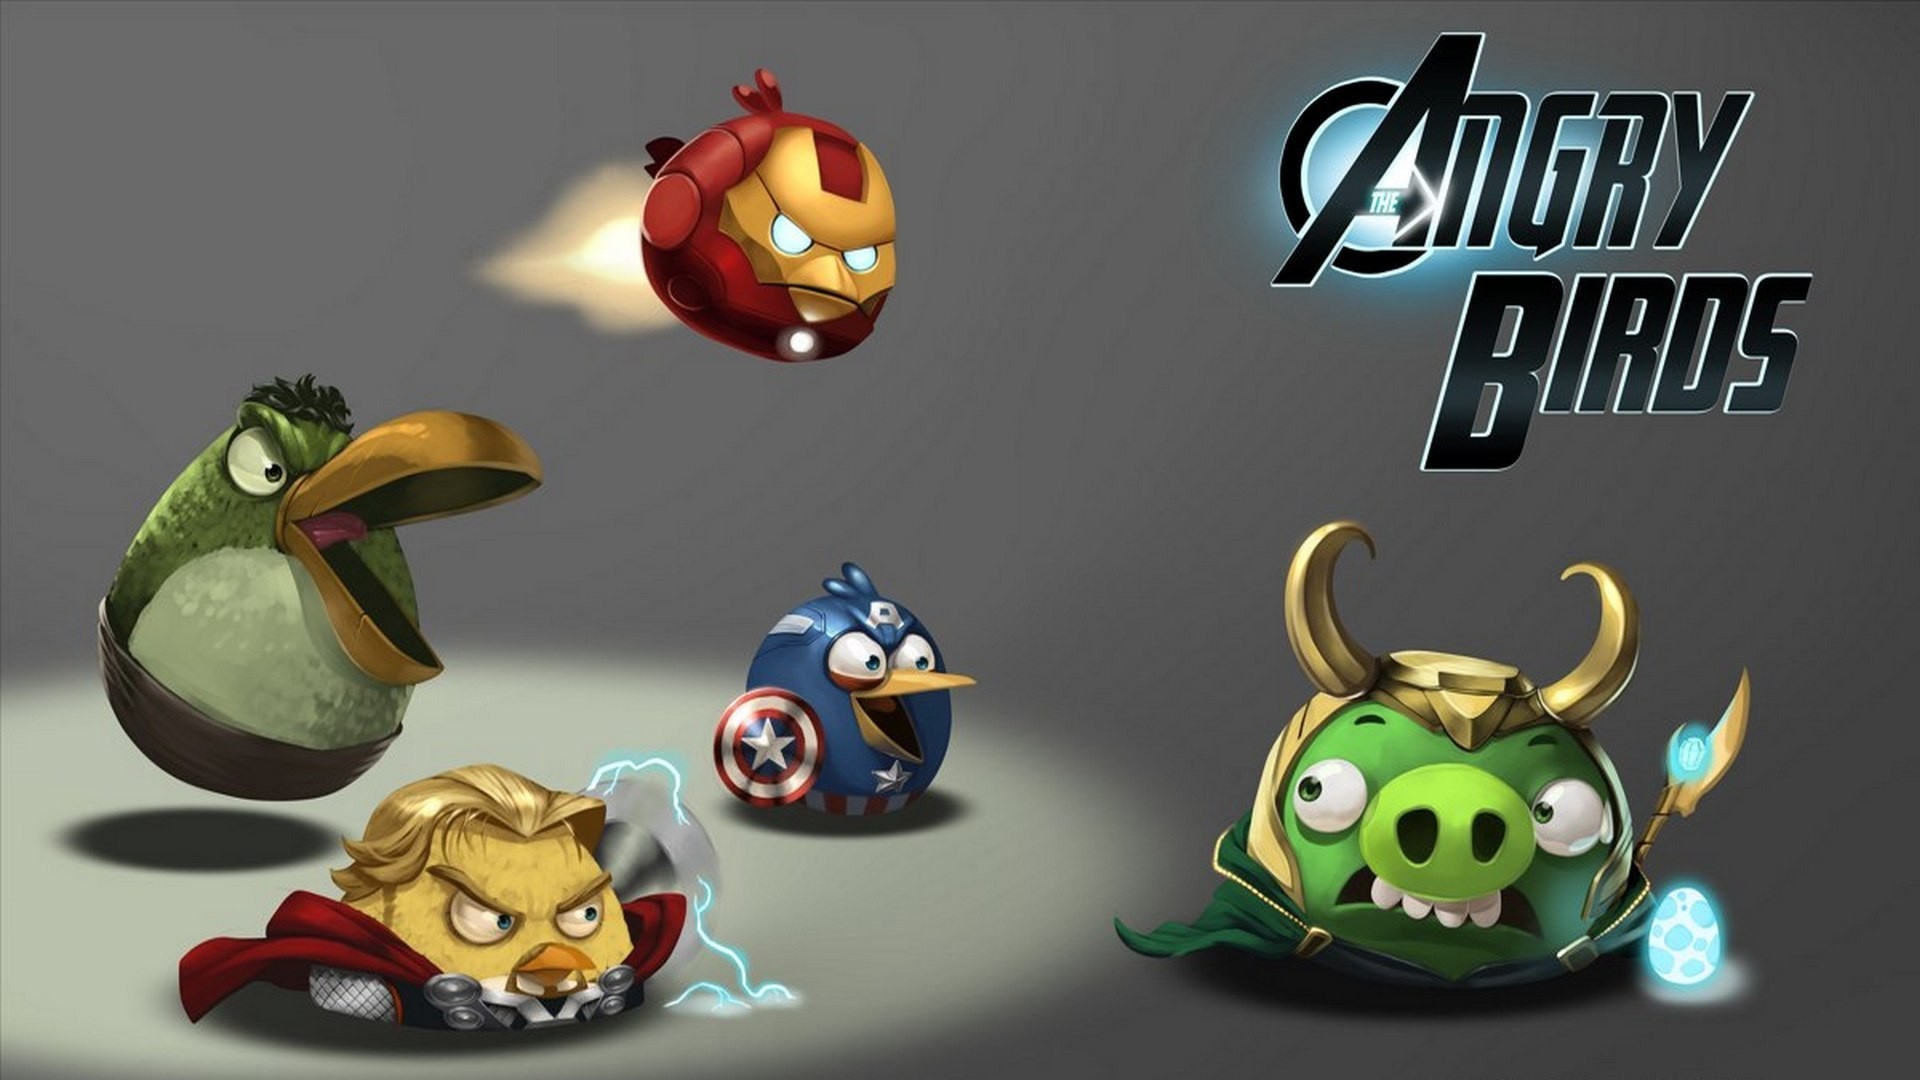 Video Game Angry Birds 1920x1080